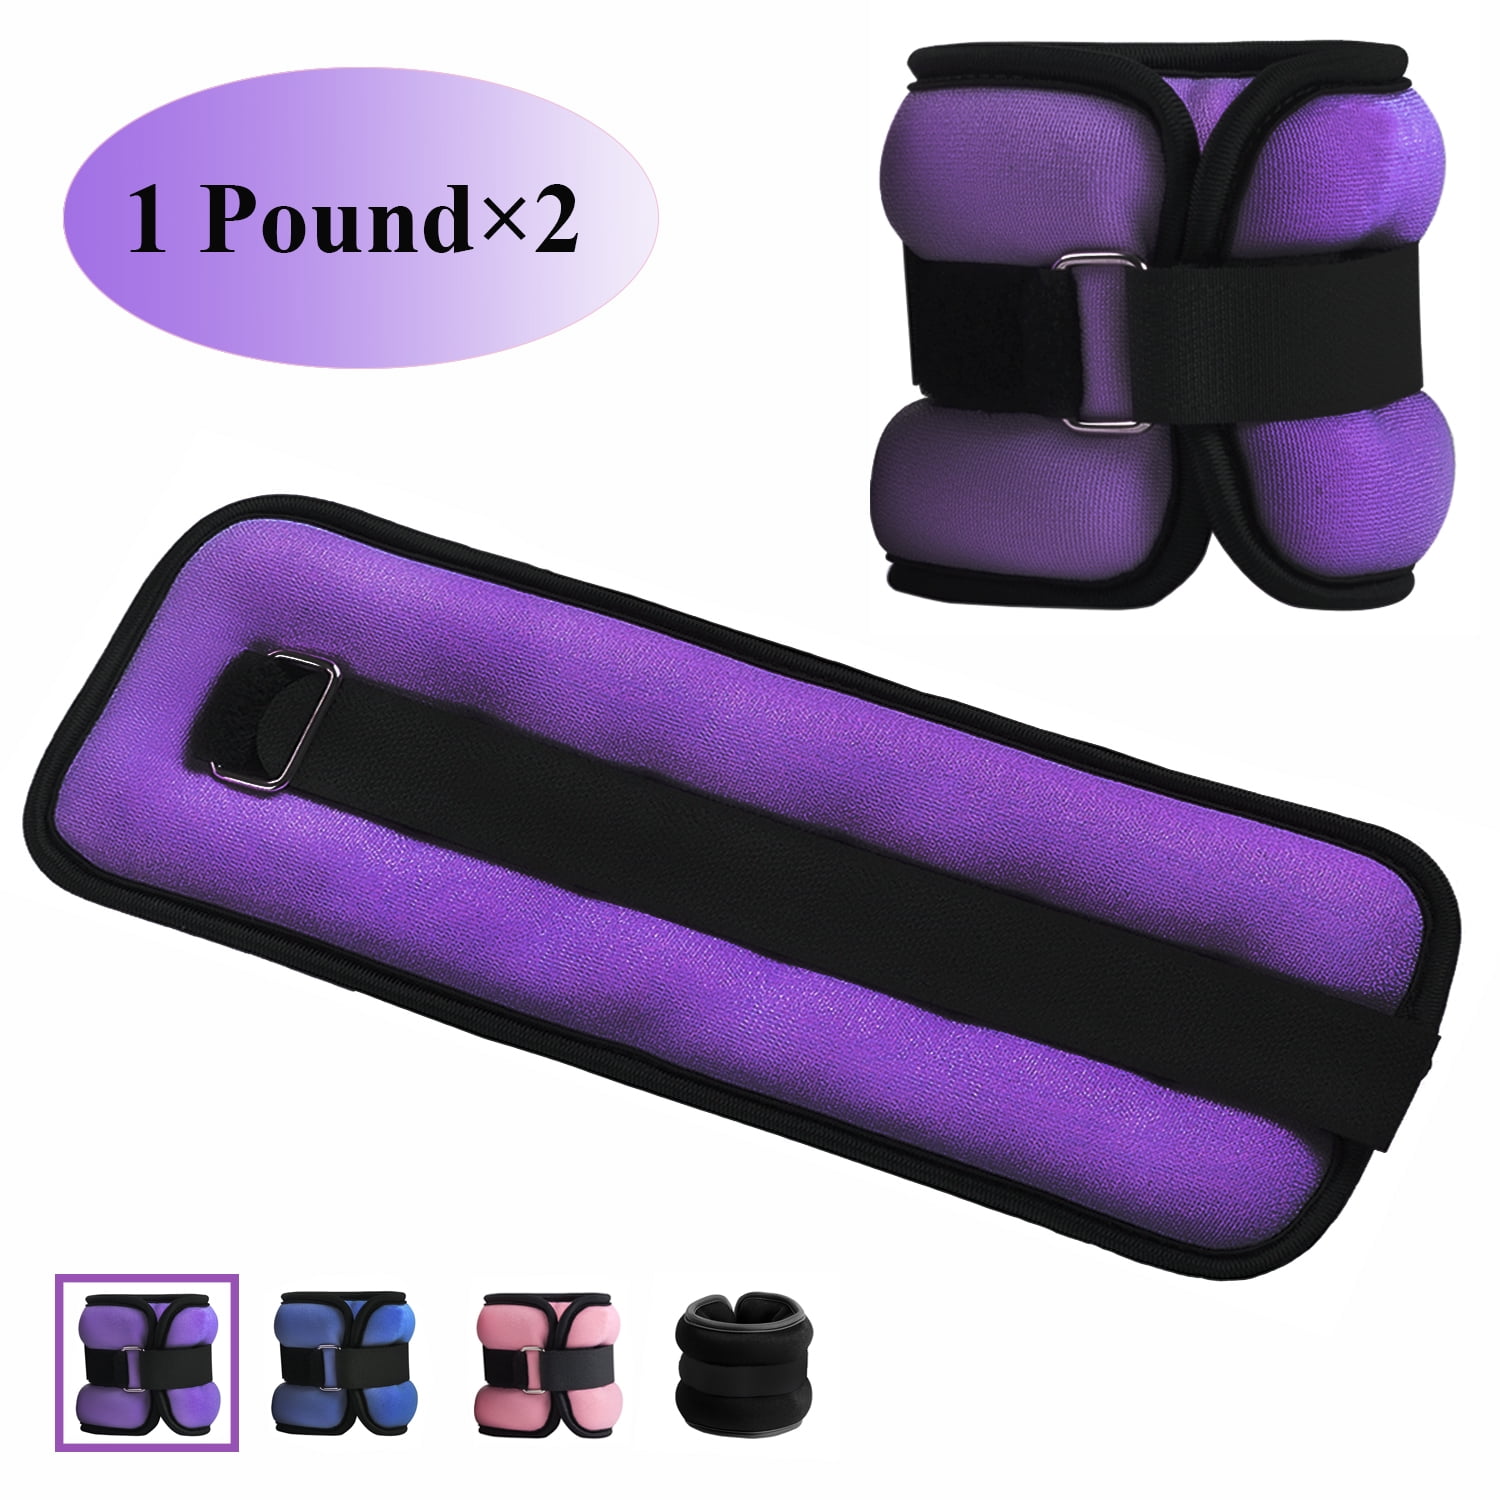 Small Leg Arm Hand Cuff Weights for Women Kids Exercise Equipment with Adjustable Straps for Fitness Gym Dancing Walking Jogging Gymnastics Aerobics Vaupan Ankle/Wrist Weights 1 Pair, 1lb 2lb 